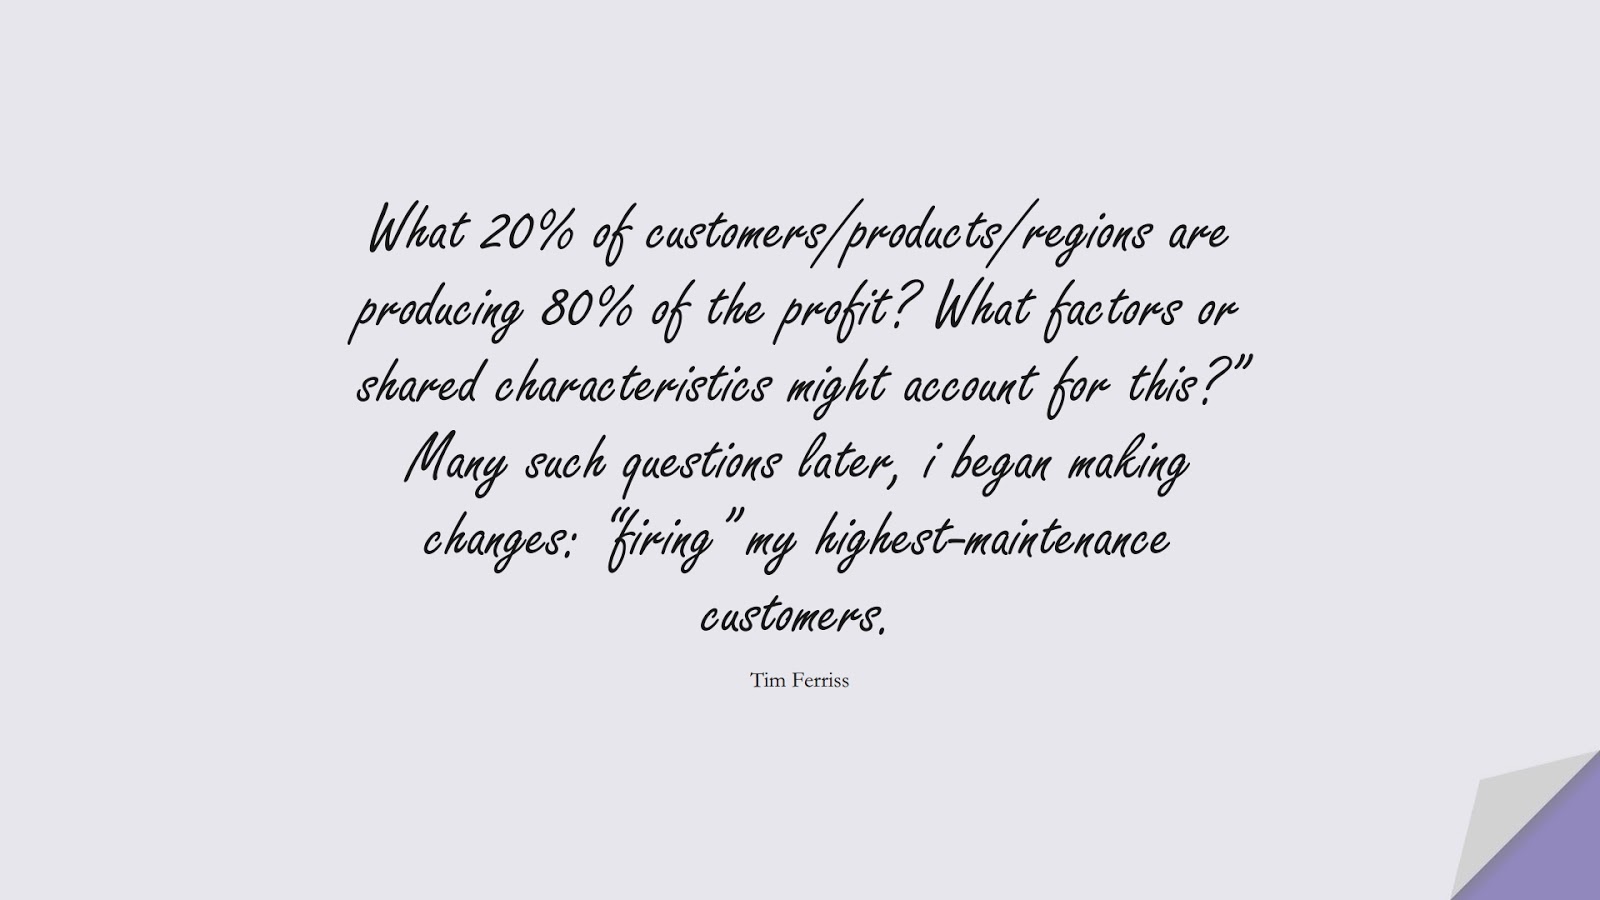 What 20% of customers/products/regions are producing 80% of the profit? What factors or shared characteristics might account for this?” Many such questions later, i began making changes: “firing” my highest-maintenance customers. (Tim Ferriss);  #TimFerrissQuotes